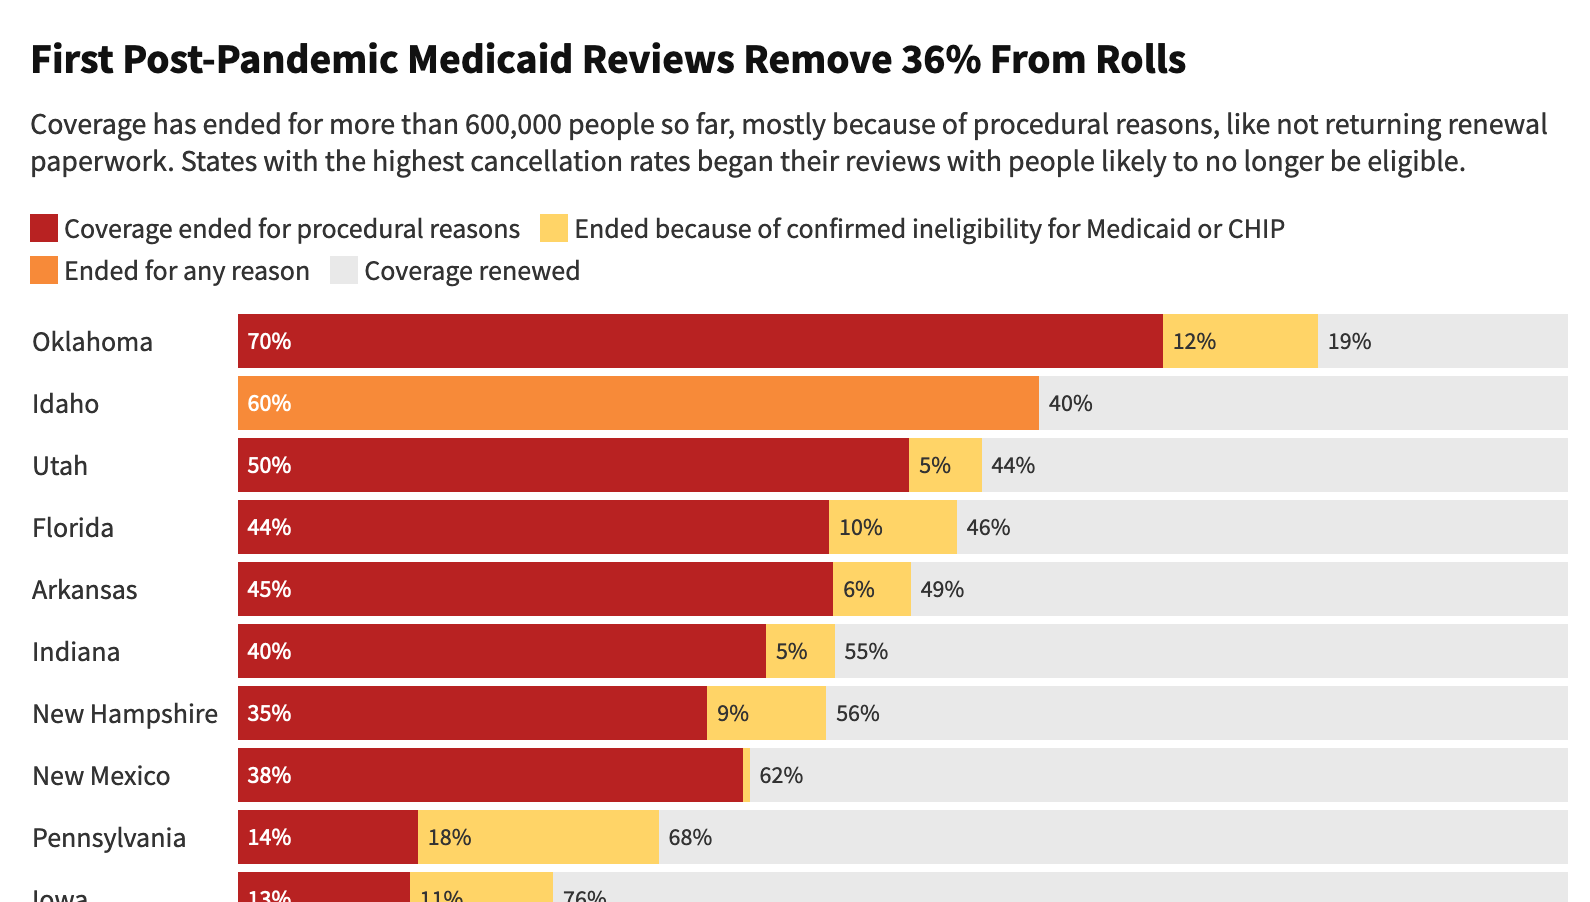 Part of a chart showing state-by-state rates of Medicaid coverage renewals and terminations in the early weeks of the Medicaid unwinding.